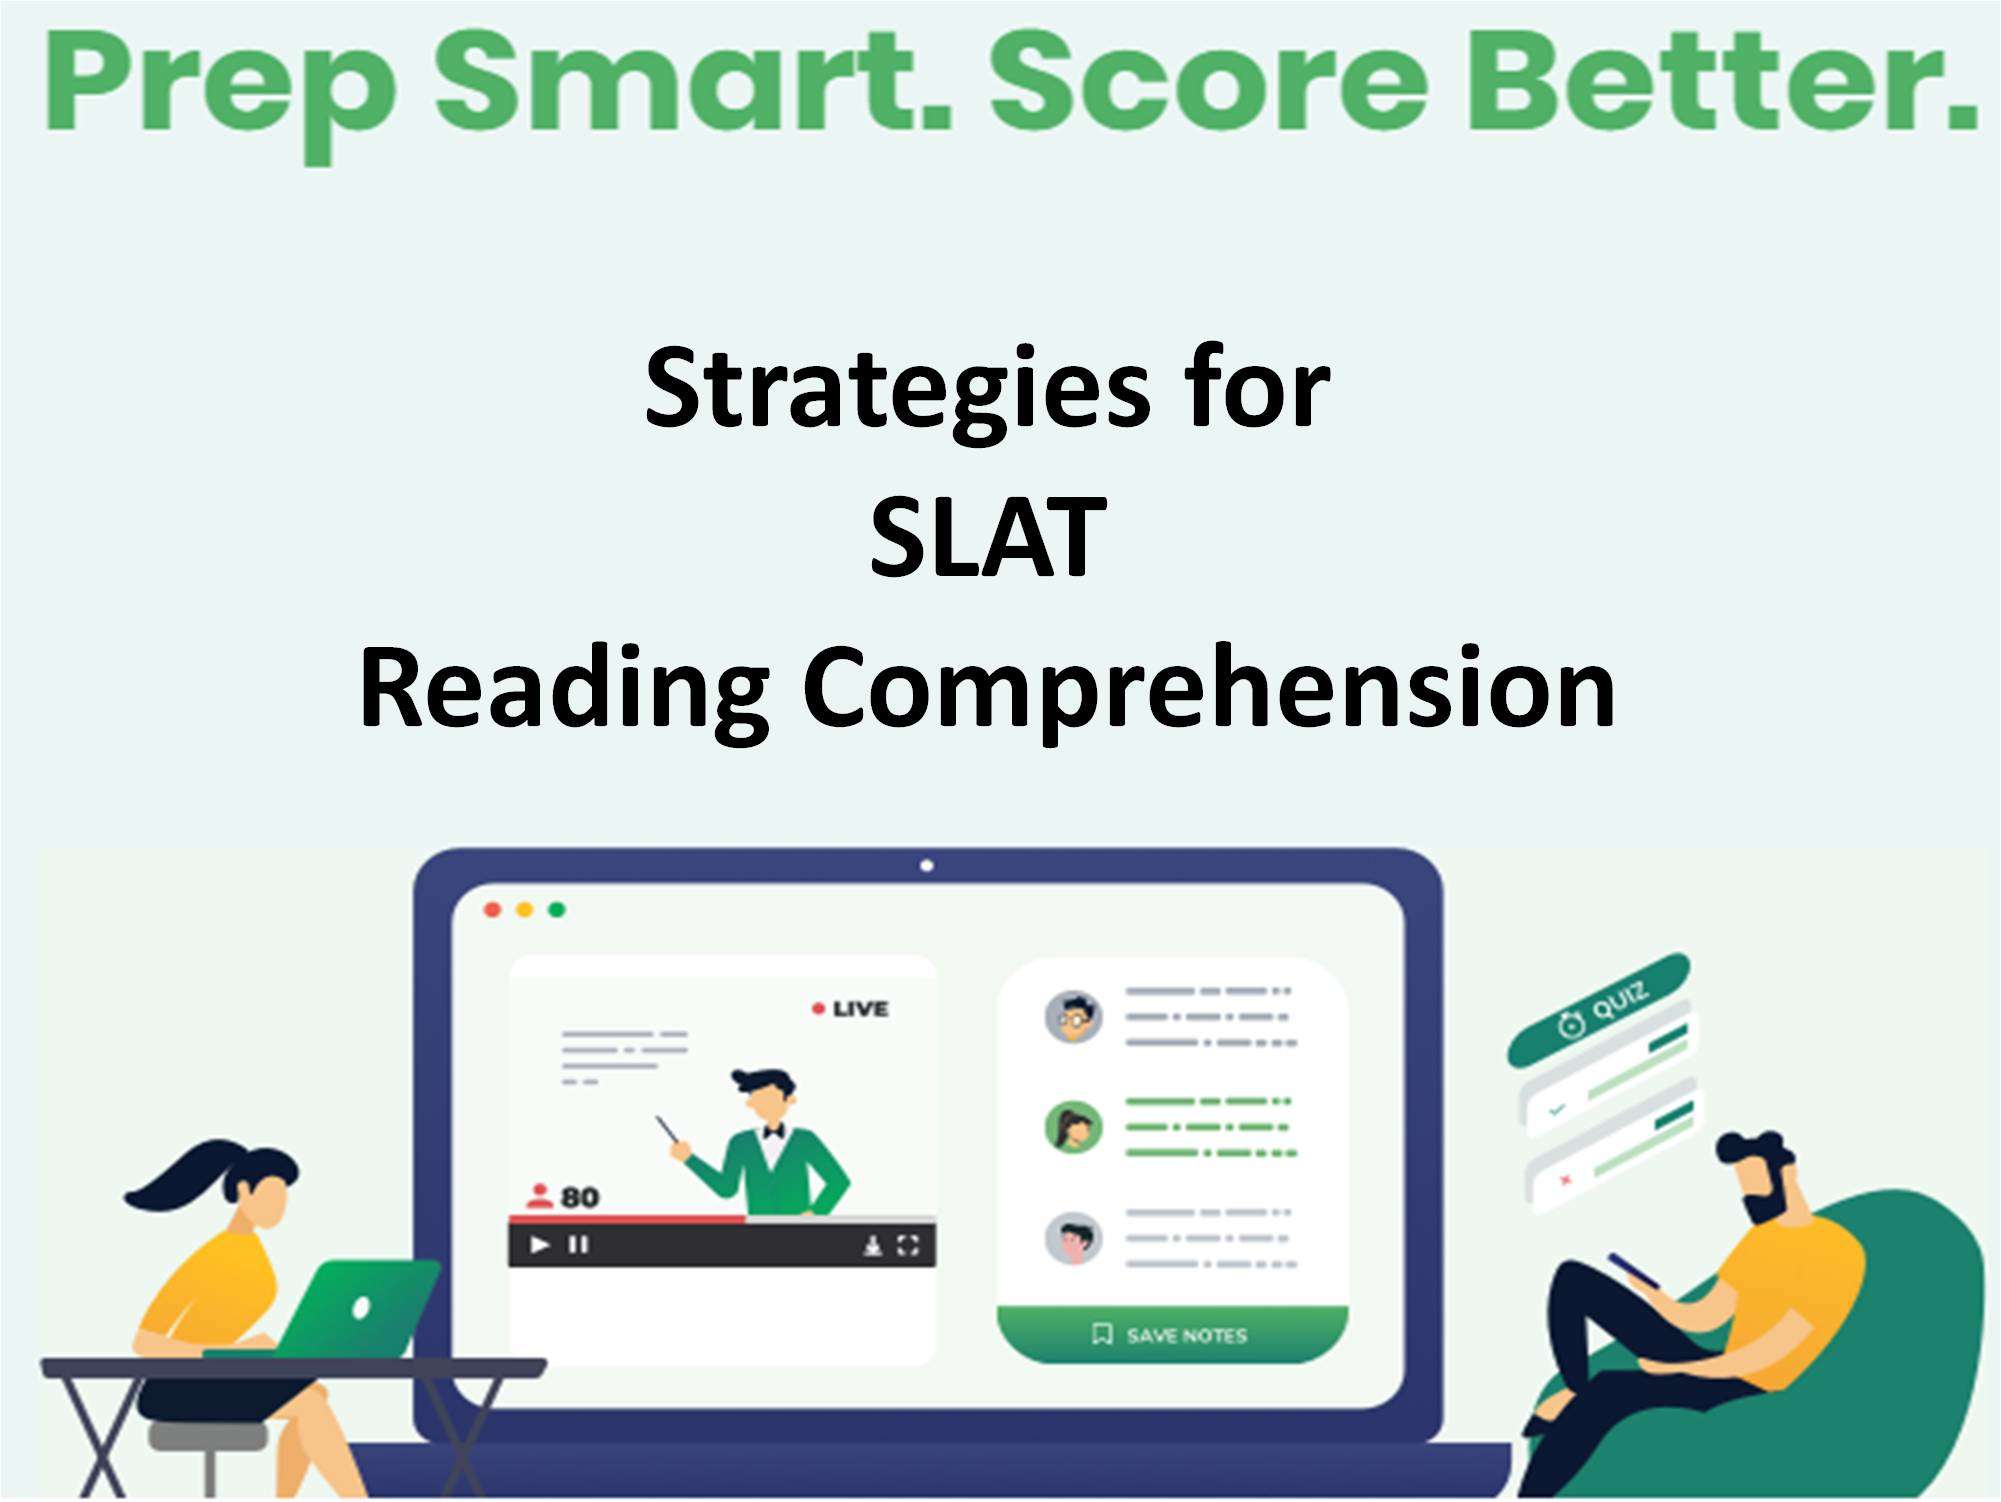 How to prepare reading comprehension for the SLAT 2020 exam